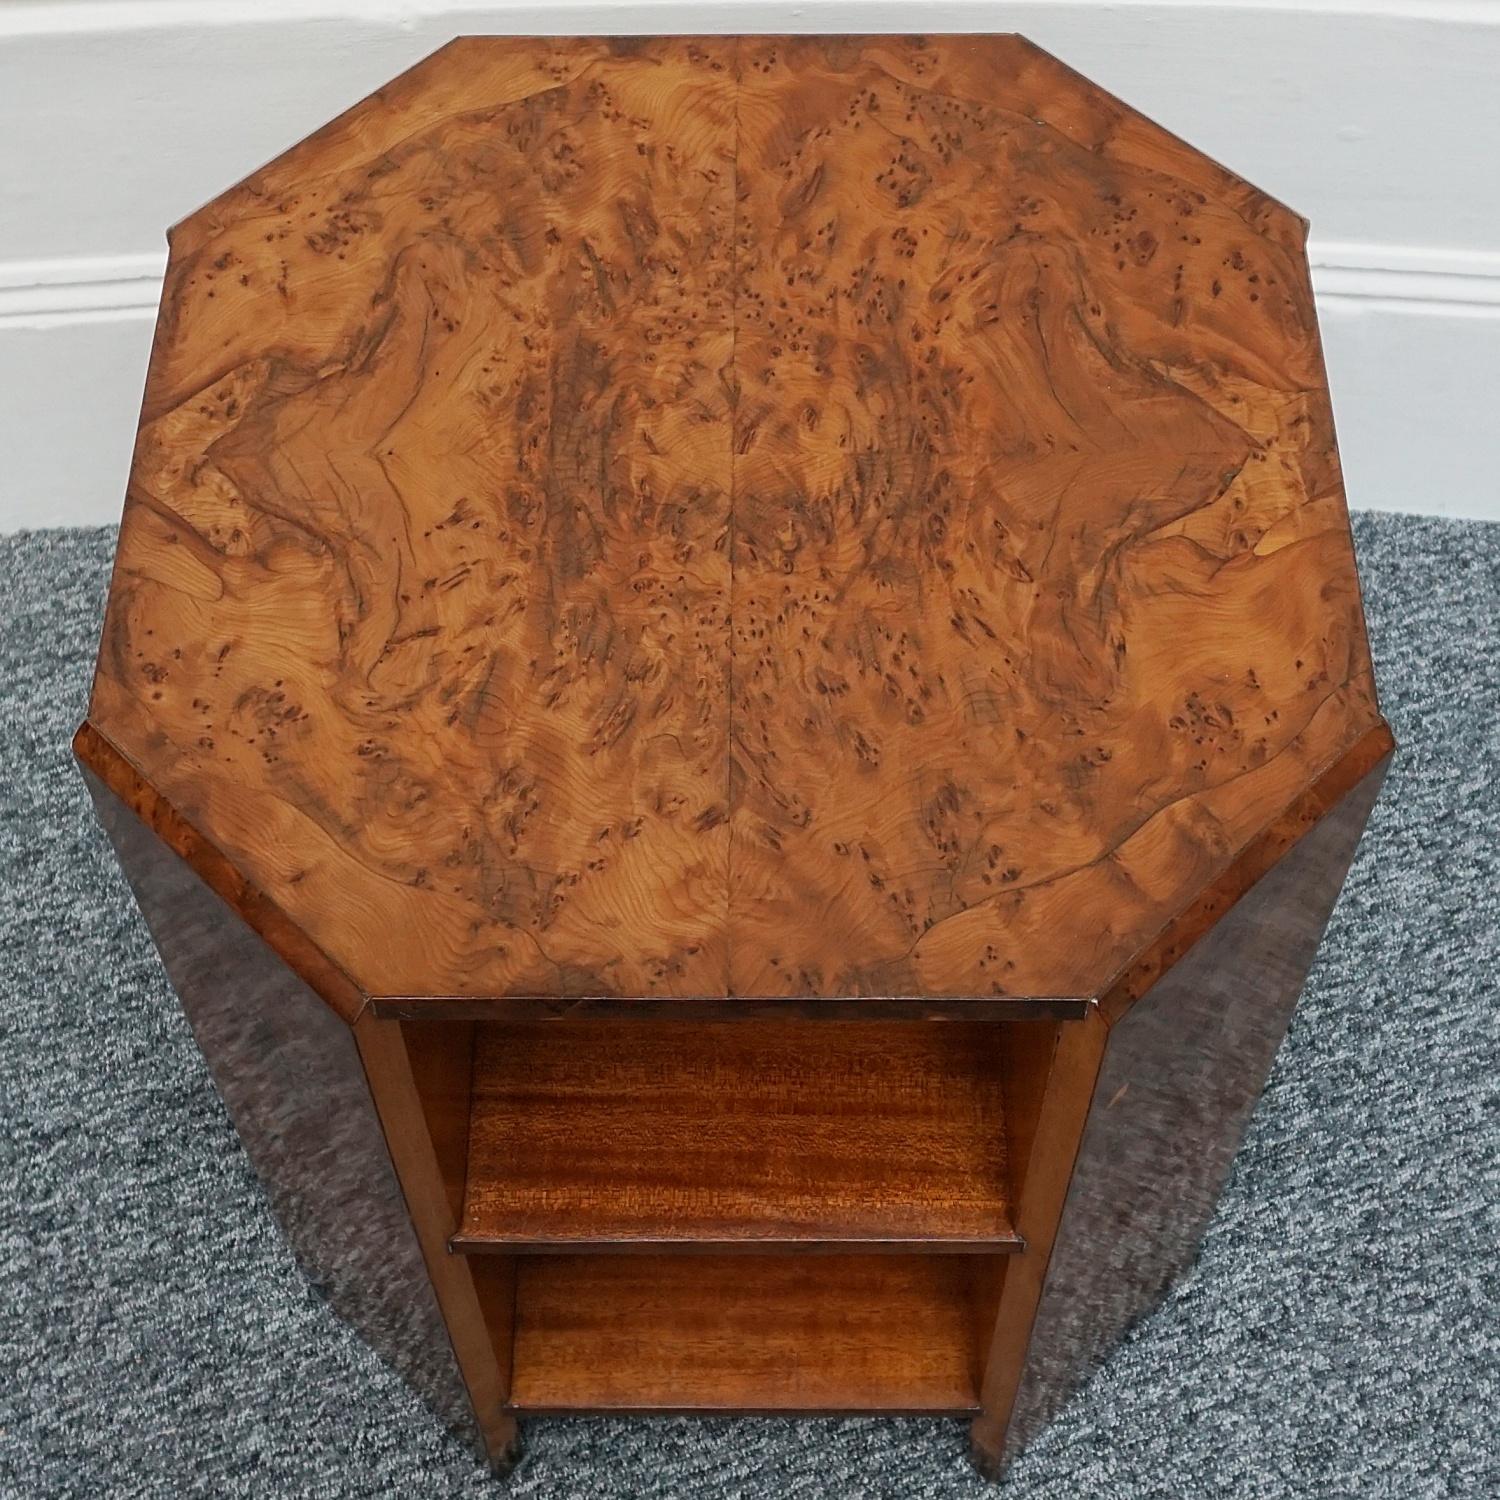 An Art Deco side table by Waring & Gillow. Burr Yew veneered with macassar ebony banding. Open two tiered shelving. Waring and Gillow Ltd label to underneath. 

Dimensions: H 53.5cm D 44.5cm

Origin: English

Date: circa 1935

Item Number: